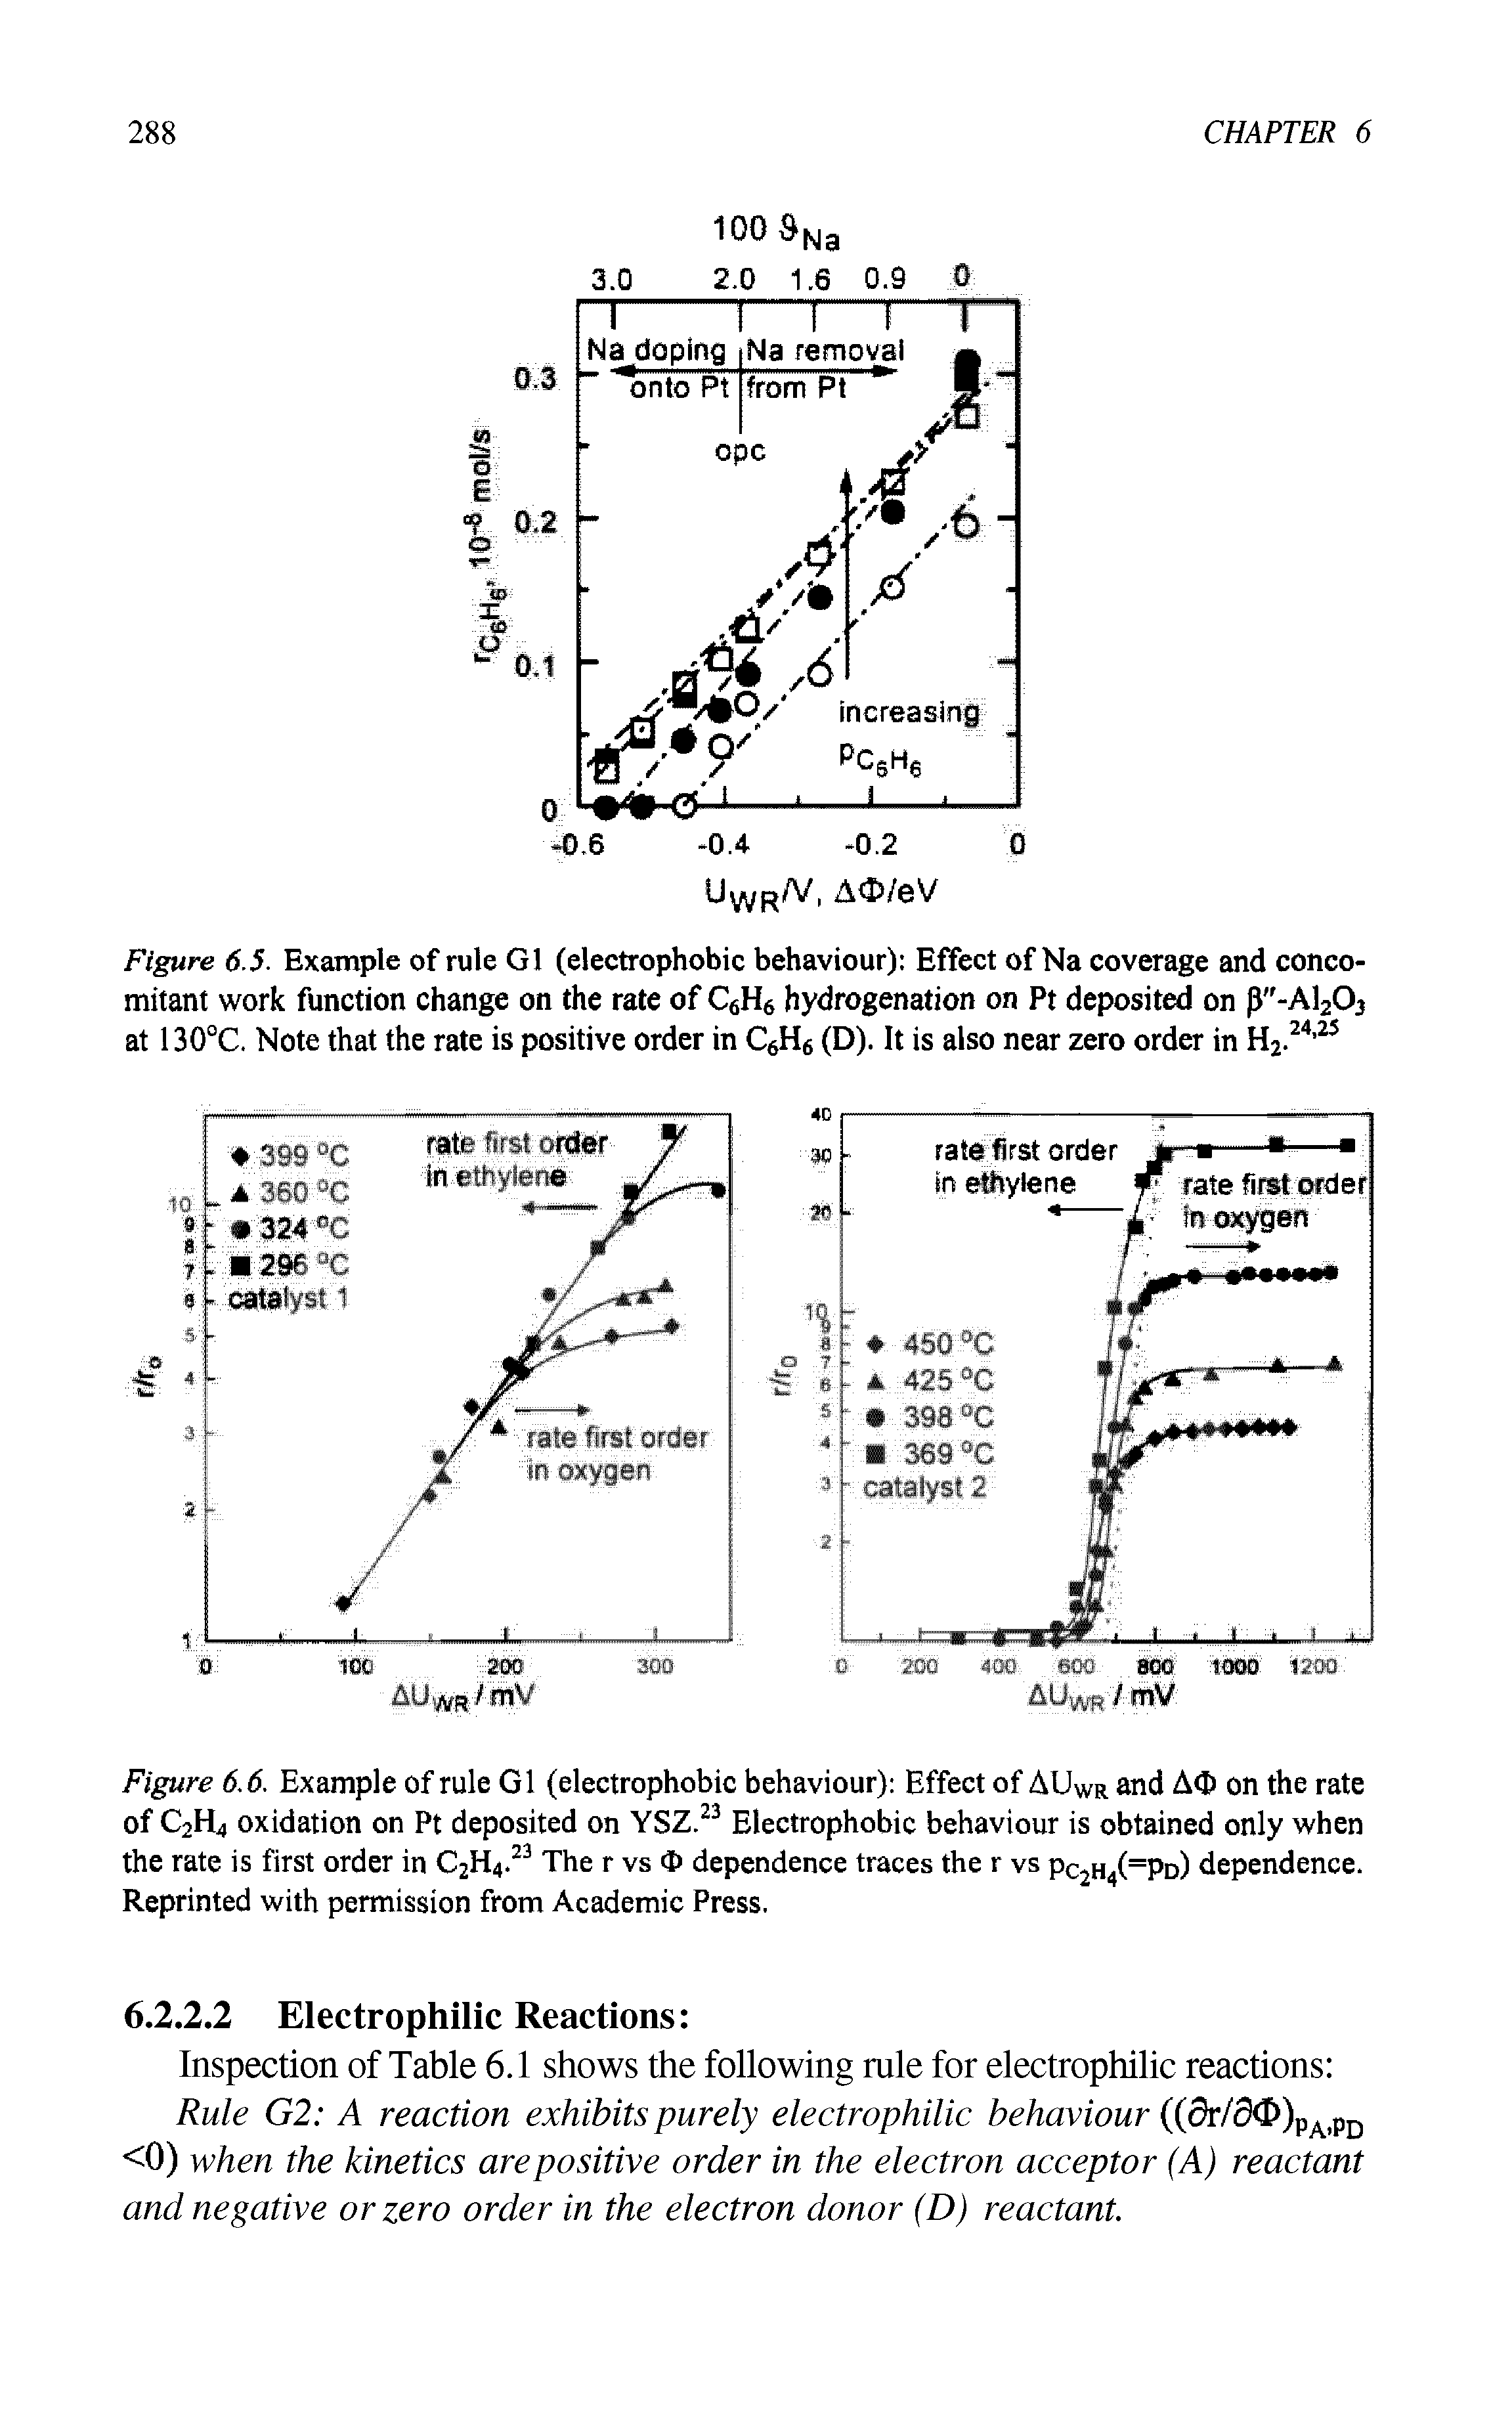 Figure 6.5. Example of rule G1 (electrophobic behaviour) Effect of Na coverage and concomitant work function change on the rate of C6H6 hydrogenation on Pt deposited on P"-A1203 at 130°C. Note that the rate is positive order in C6H6 (D). It is also near zero order in H2.24,25...